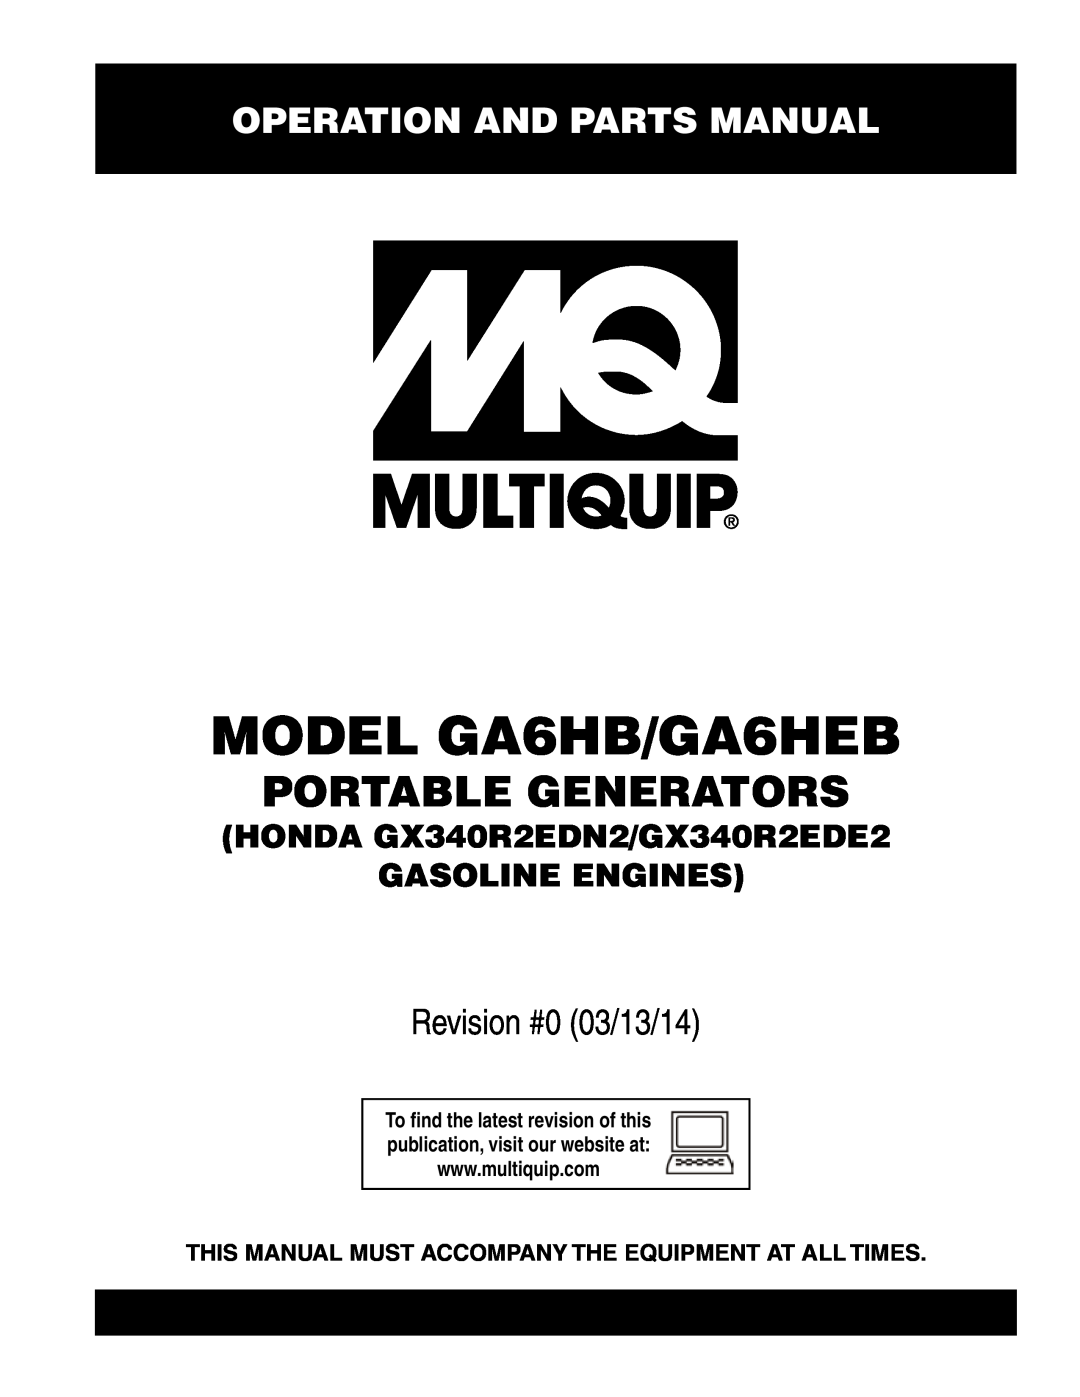 Multiquip ga6HB, ga6HEB manual Operation and Parts Manual, This Manual Must Accompany The Equipment At All Times 